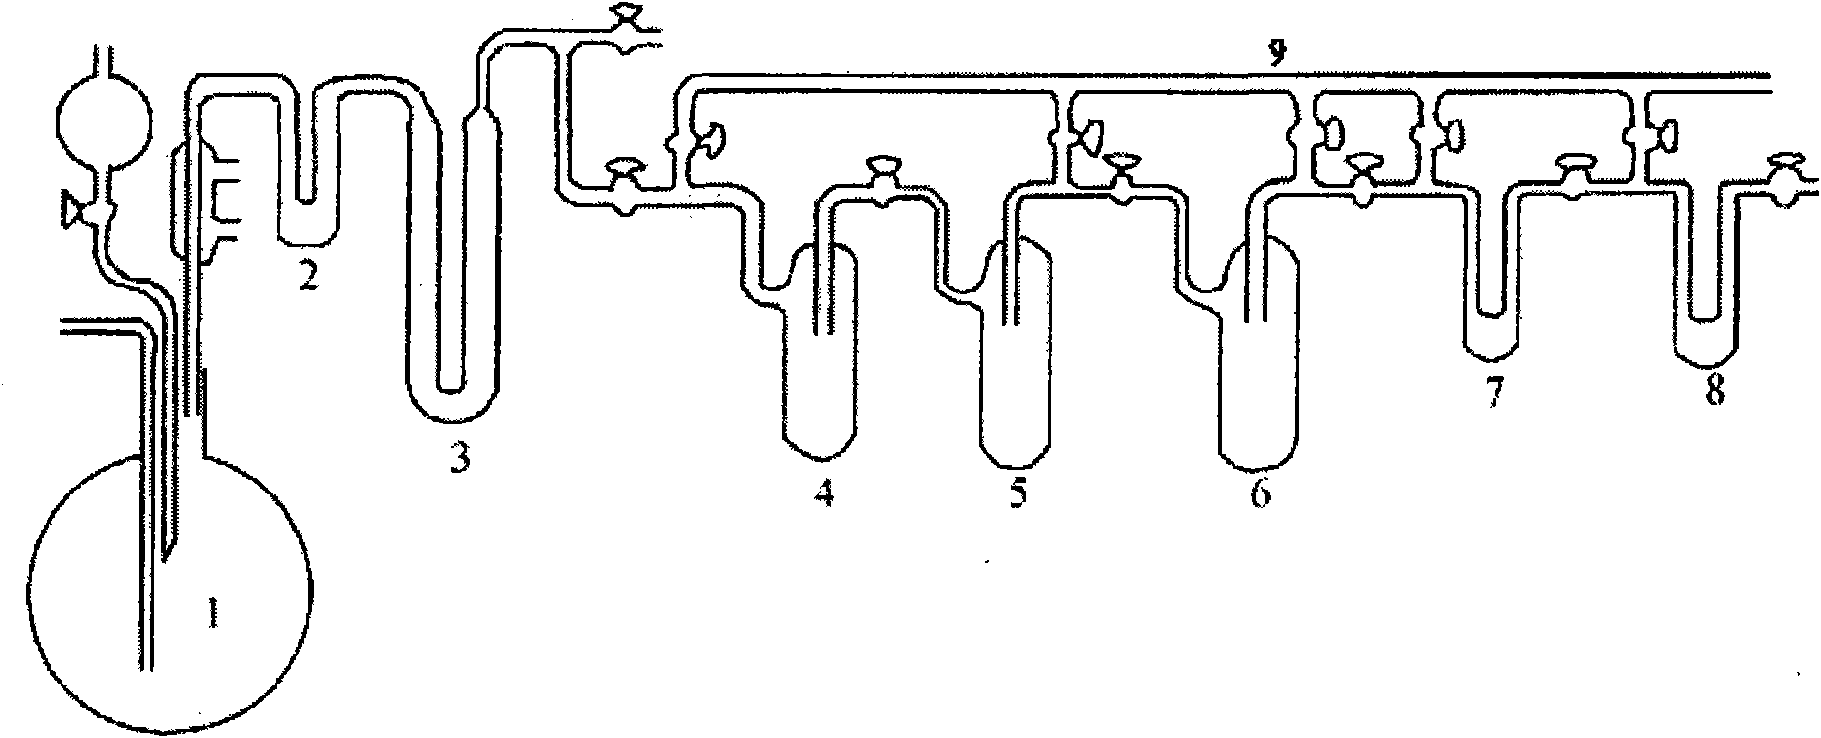 Technique for preparing phosphine by heating white phosphorous placed into potassium hydroxide solution